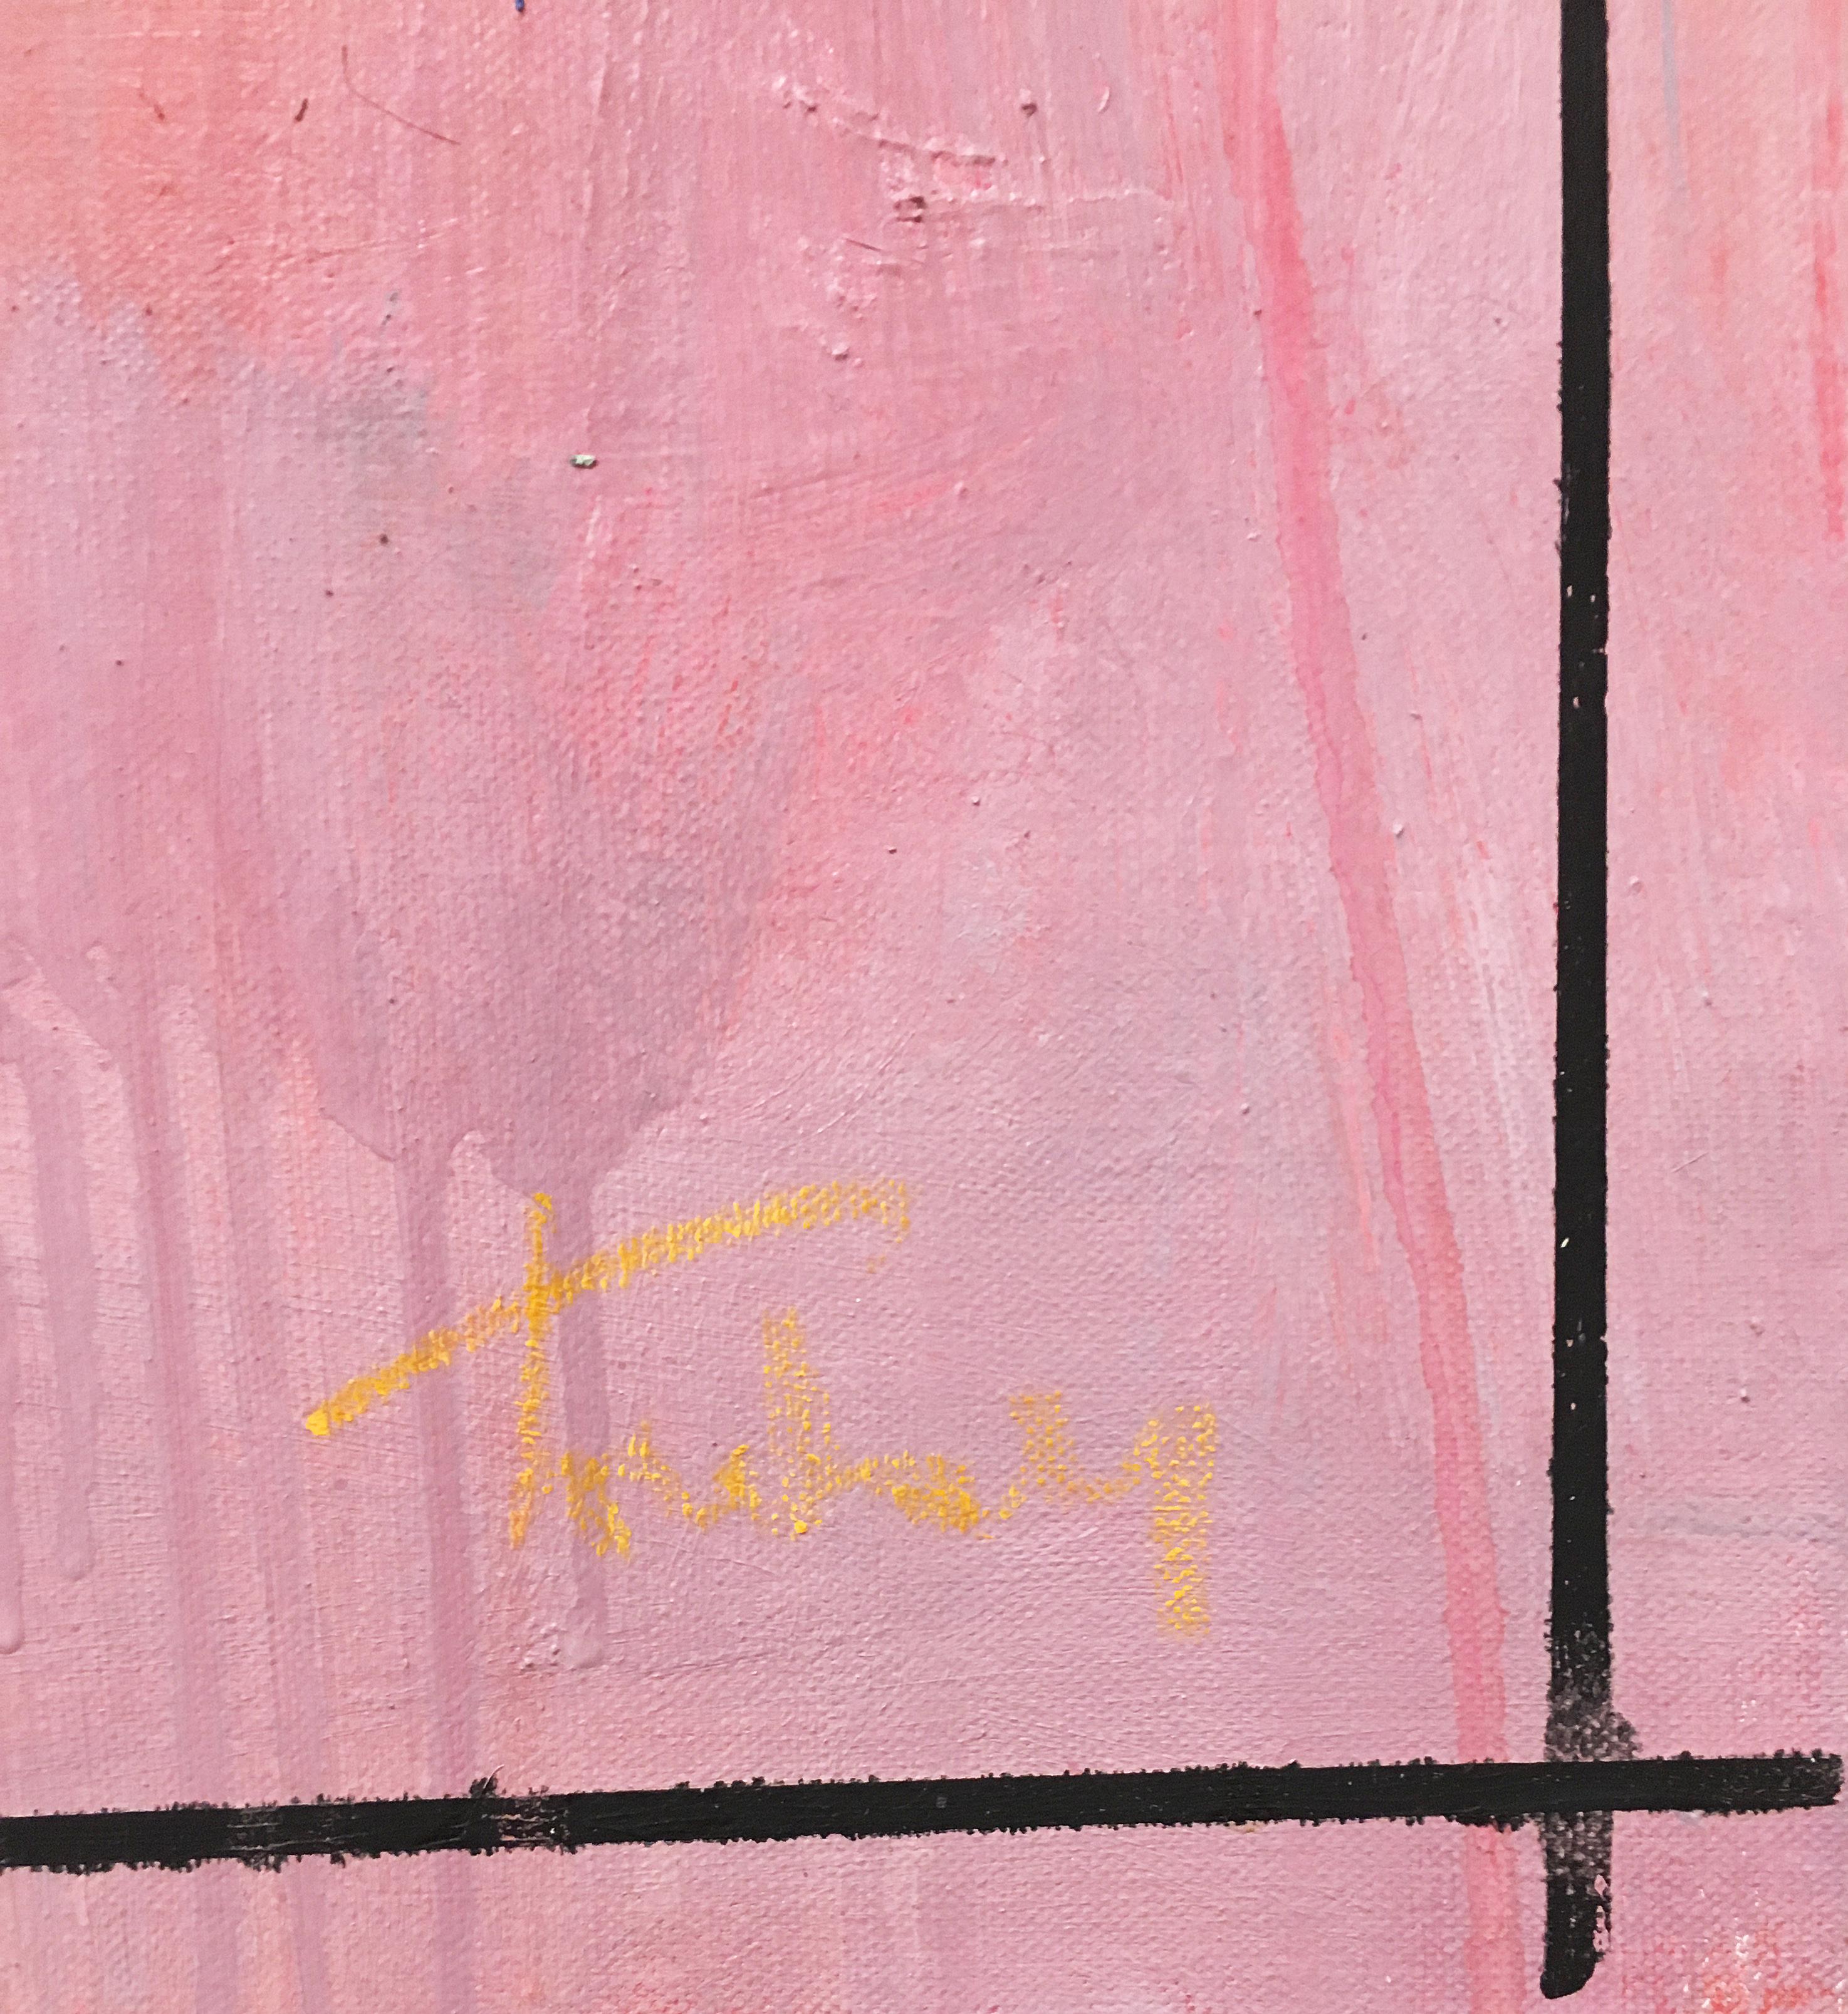 “Je T'aime 16” by Linda Touby, 2018. Oil on canvas, 24 x 20 inches. This painting features textural, cumulative layers of brushstrokes on a flat field of color. The floating zones of luminous pigments are in soft and dark pinks, light blue, and